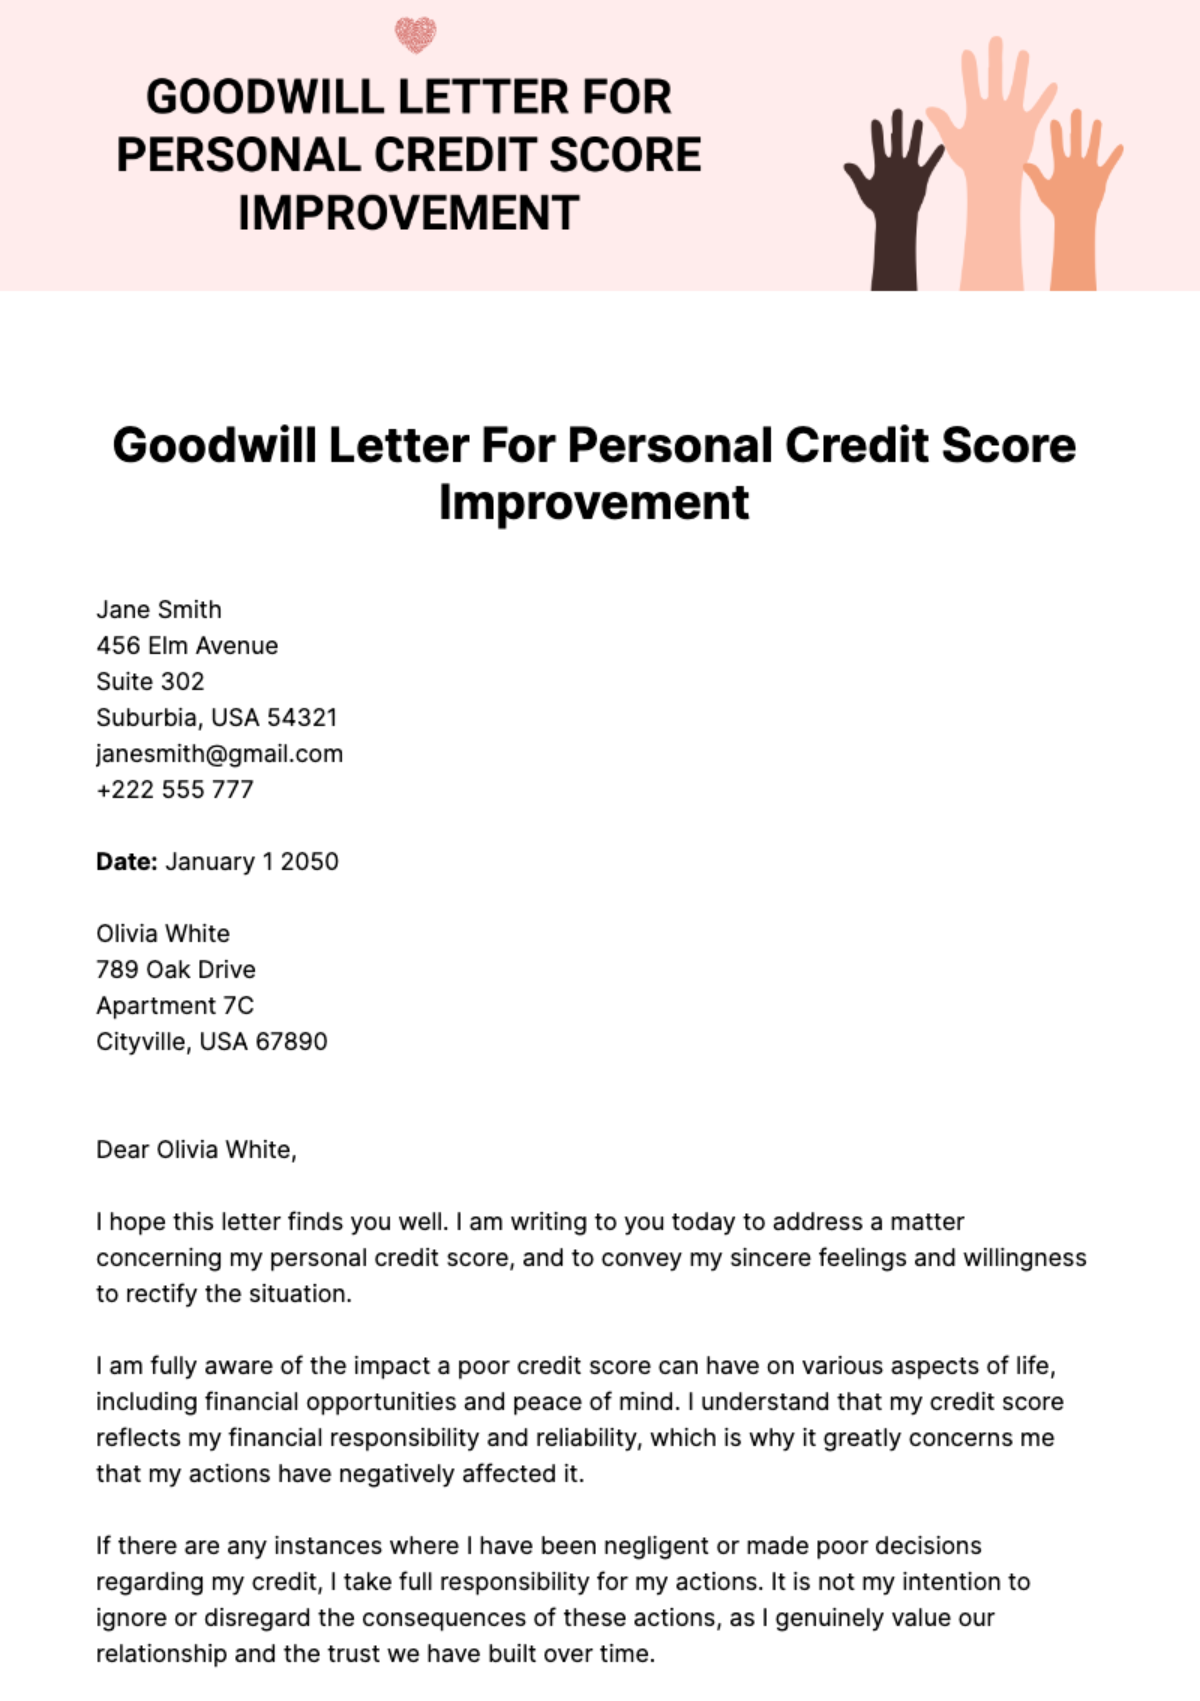 Goodwill Letter For Personal Credit Score Improvement Template